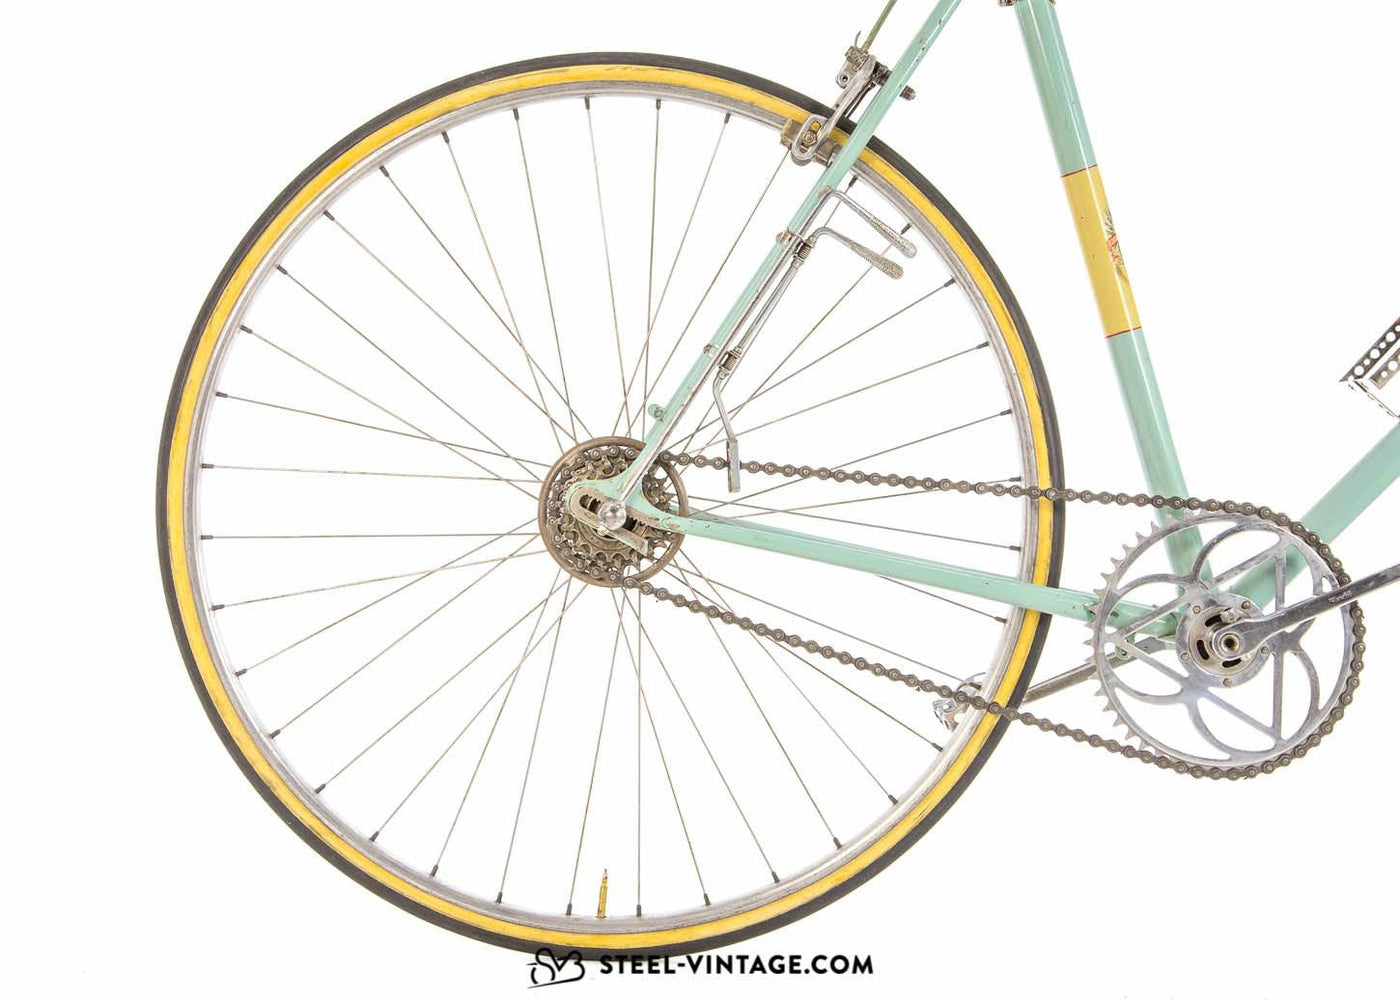 Bianchi Folgore Classic Bicycle 1940s - Steel Vintage Bikes